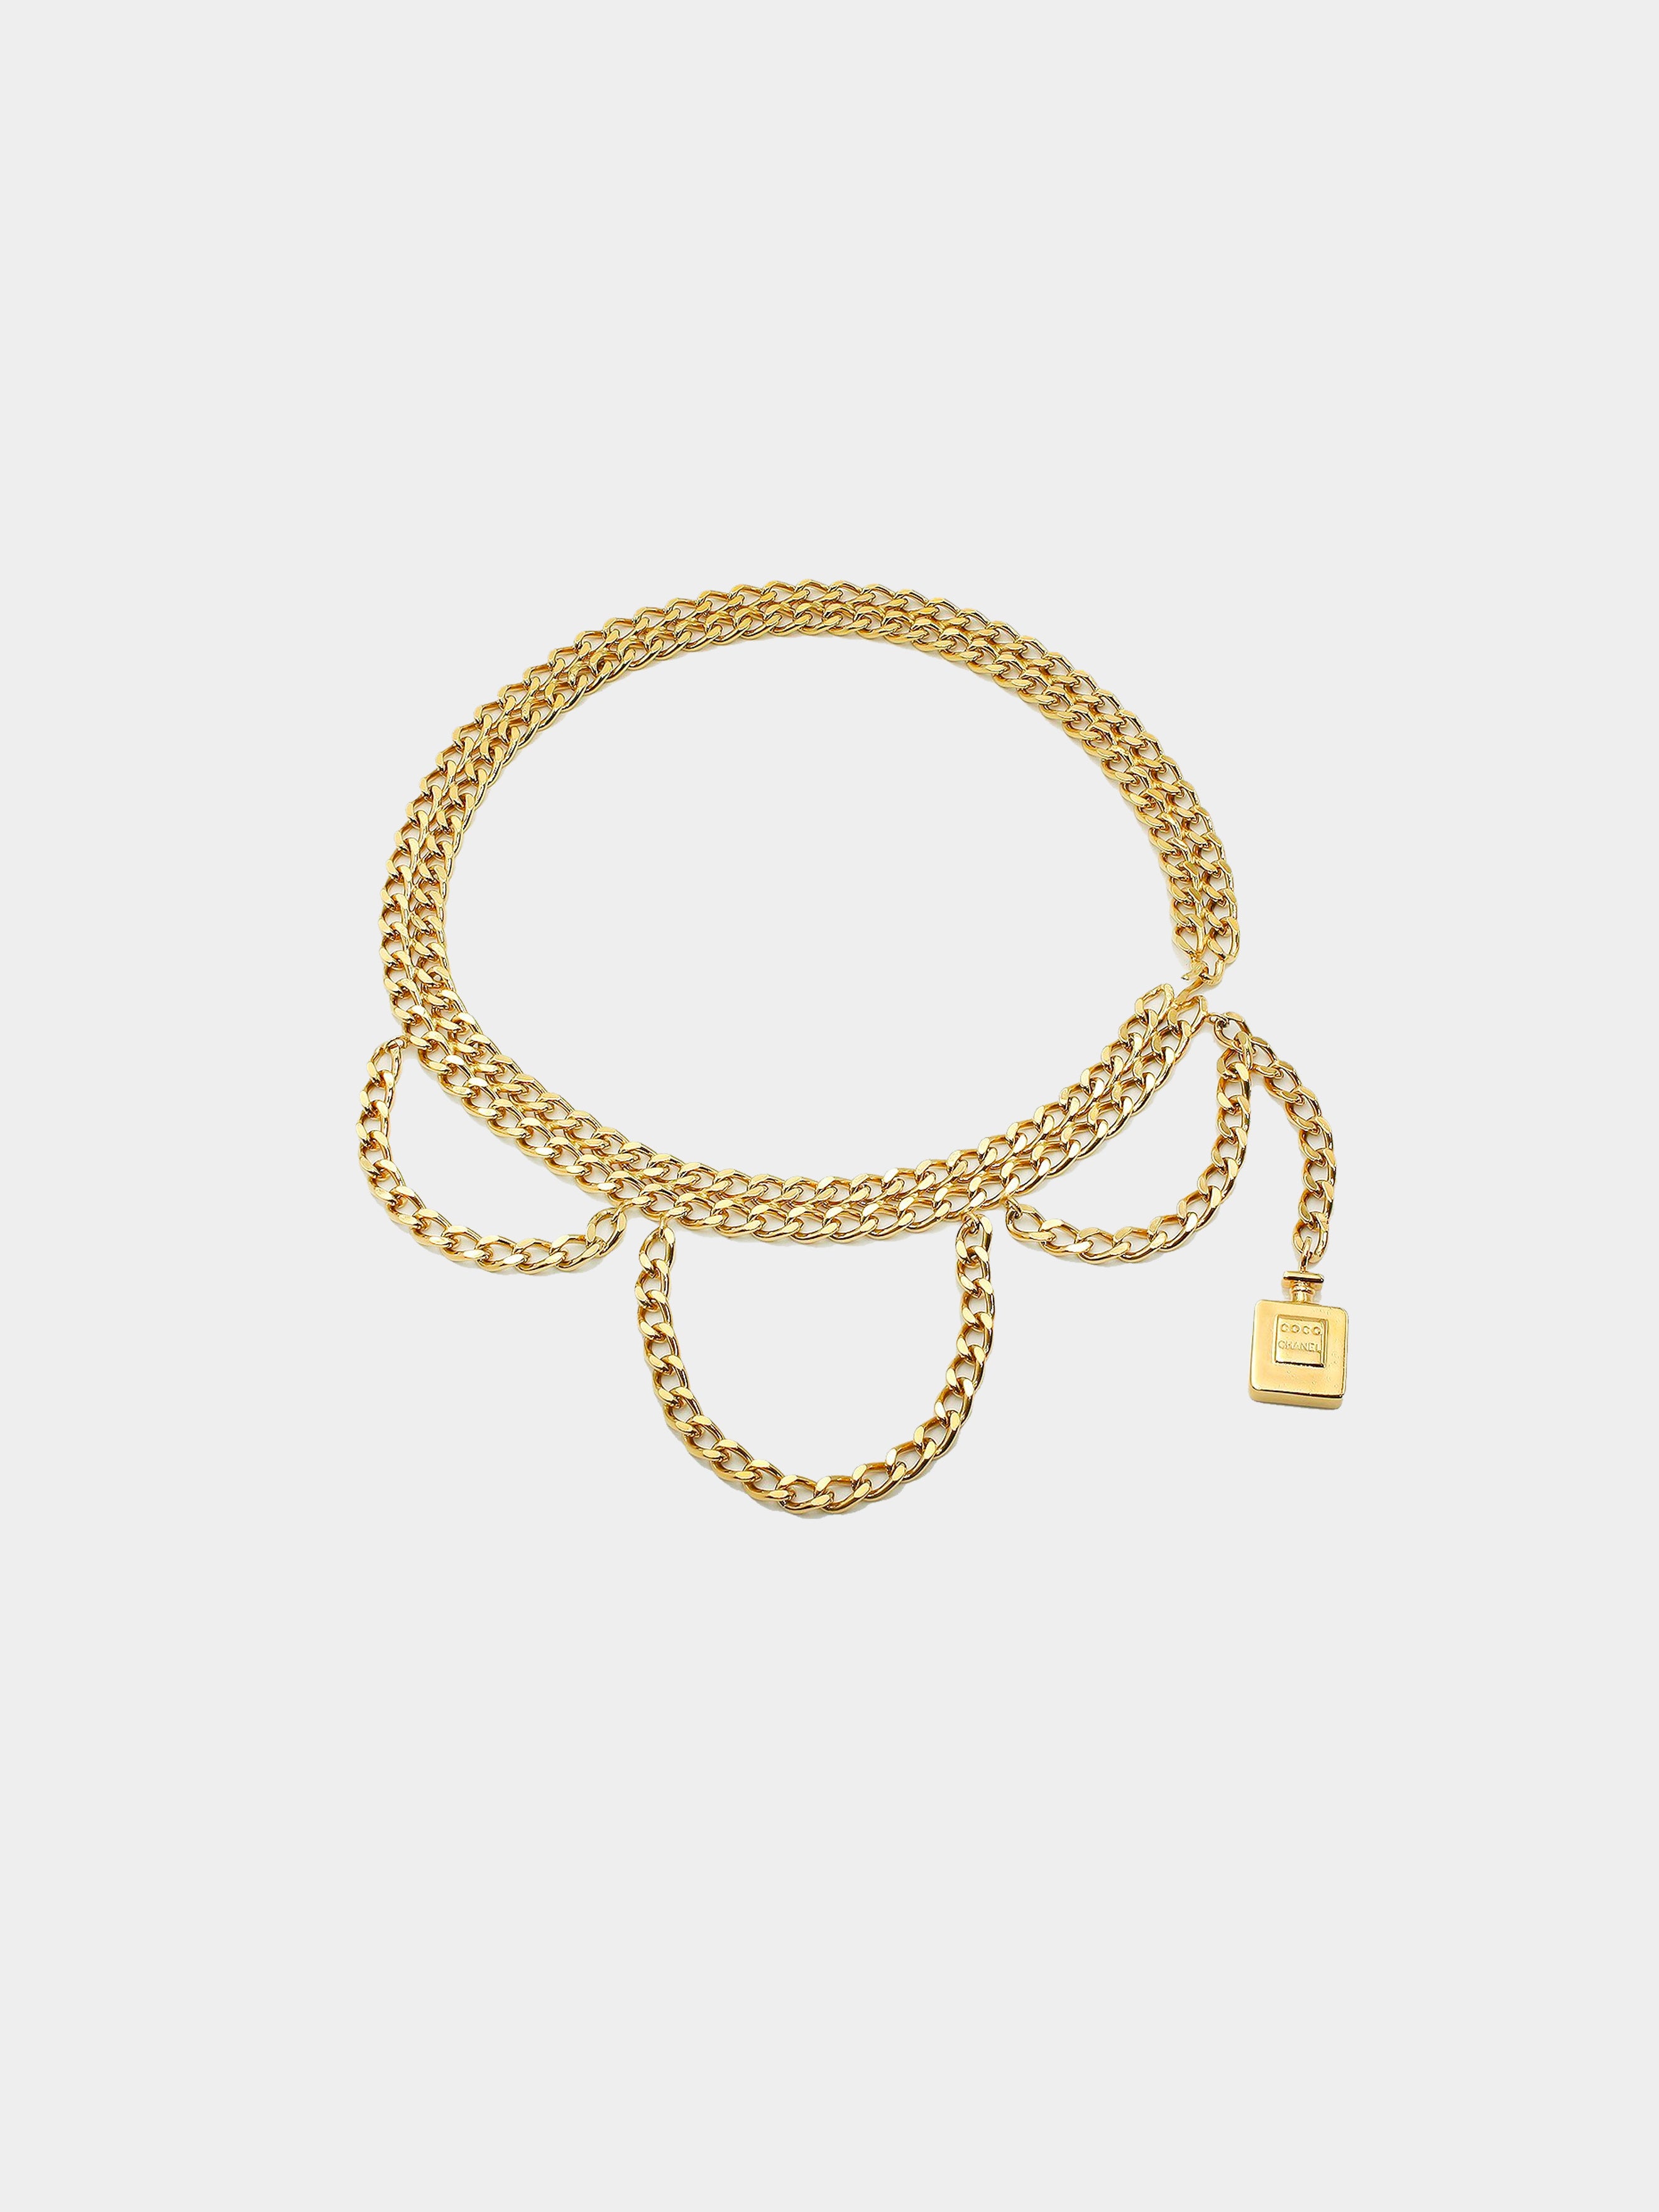 Chanel 1990s Gold Double Chain Perfume Belt